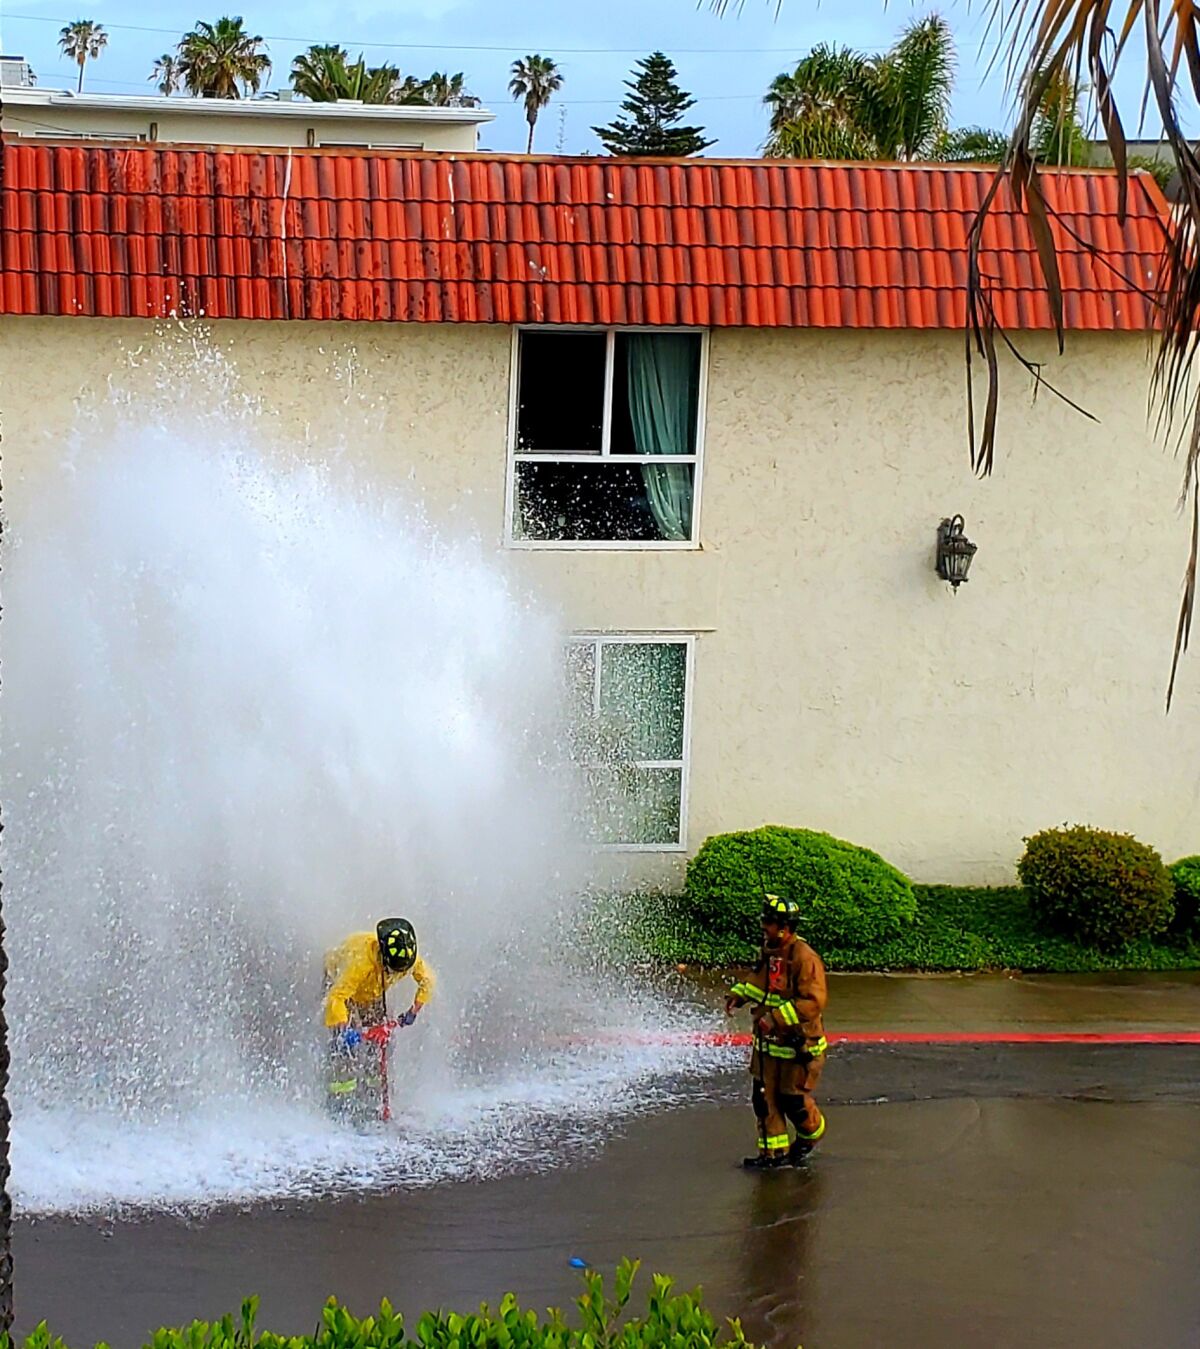 Emergency personnel work to shut off a broken fire hydrant in the 300 block of Bonair Street on May 20.